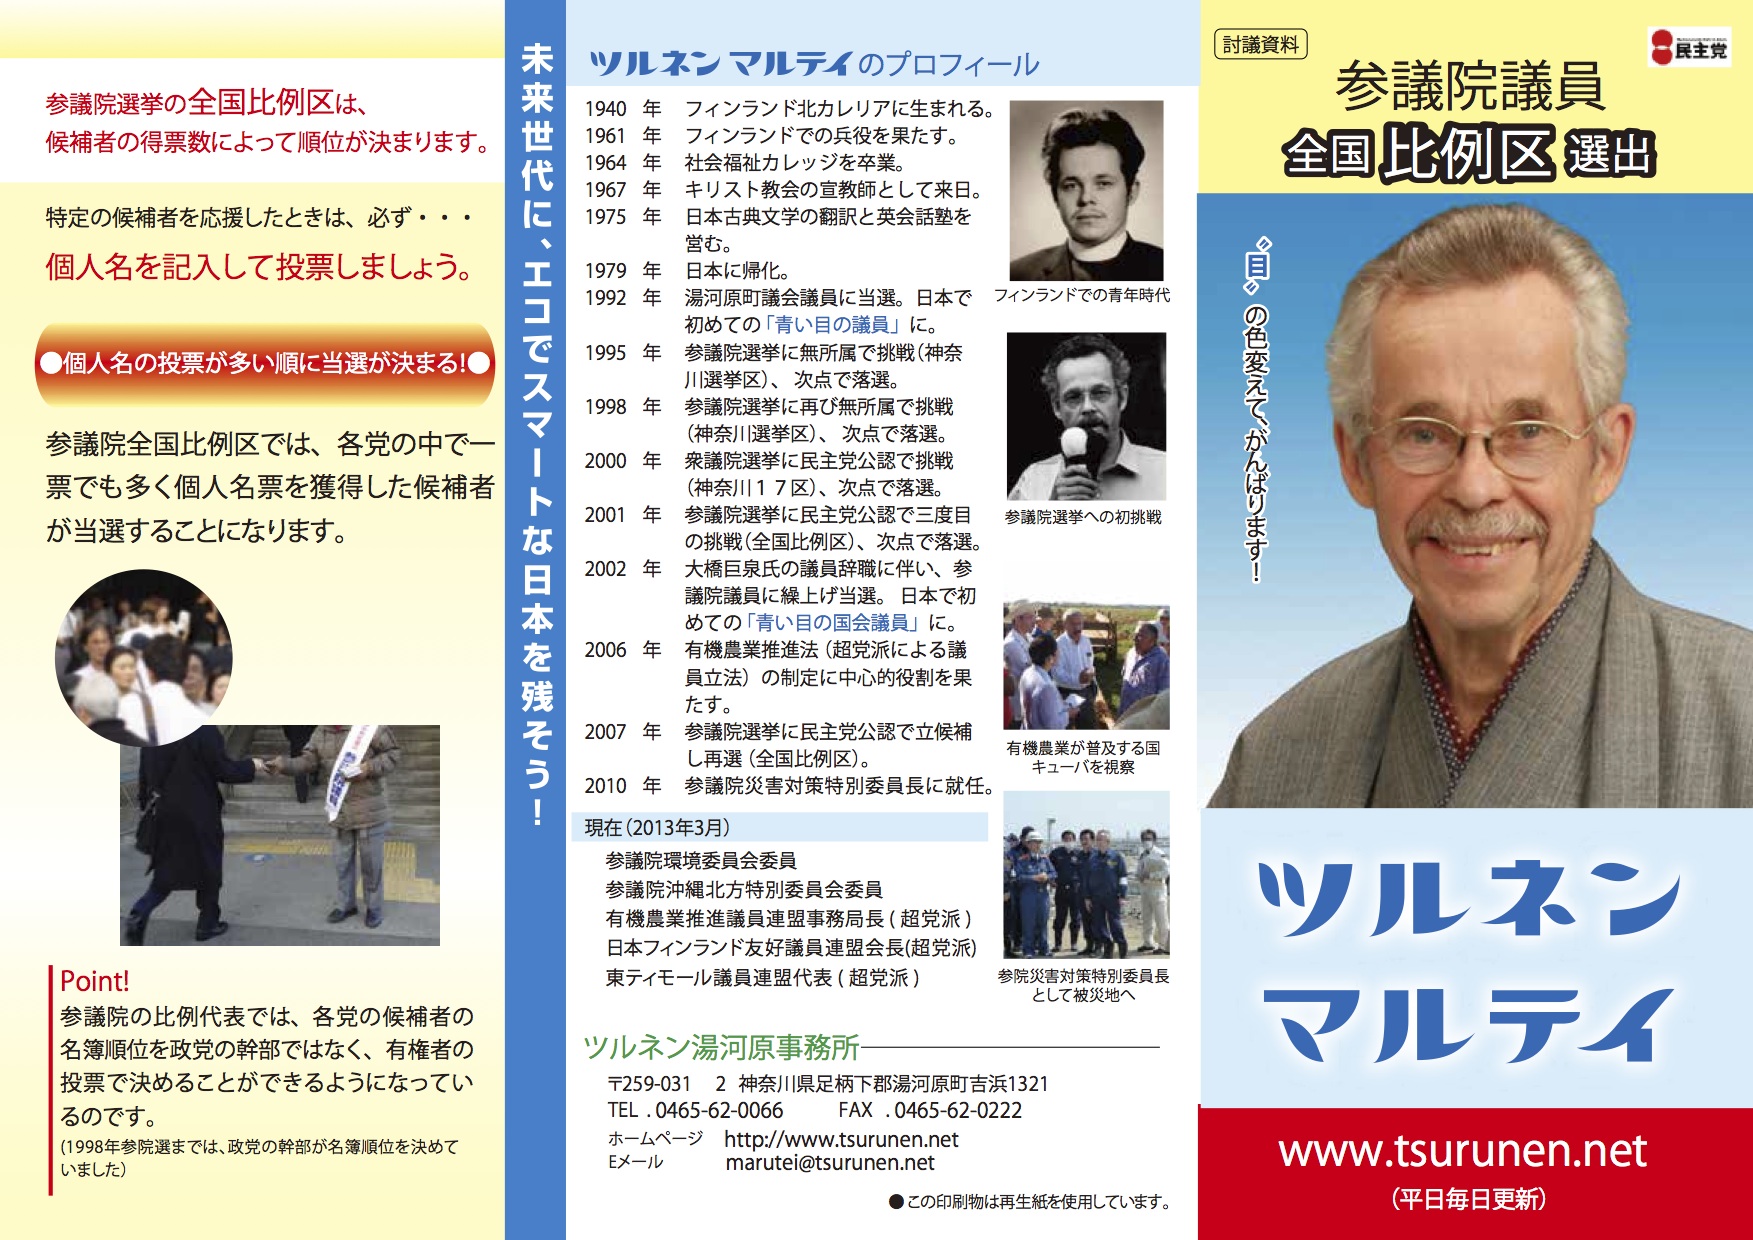 Iris diaspora: Democratic Party of Japan candidate Marutei  Tsurunen offers to 'change his eye color' &#8212; or 'change his mind,' in a pun based on his European ethnicity&#8212; in a pamphlet produced ahead of the House of Councilors election last month.  The Finland-born naturalized Japanese lost his seat in the election after coming in 12th in the party's proportional representation list, down from sixth in 2007. | THE WASHINGTON POST